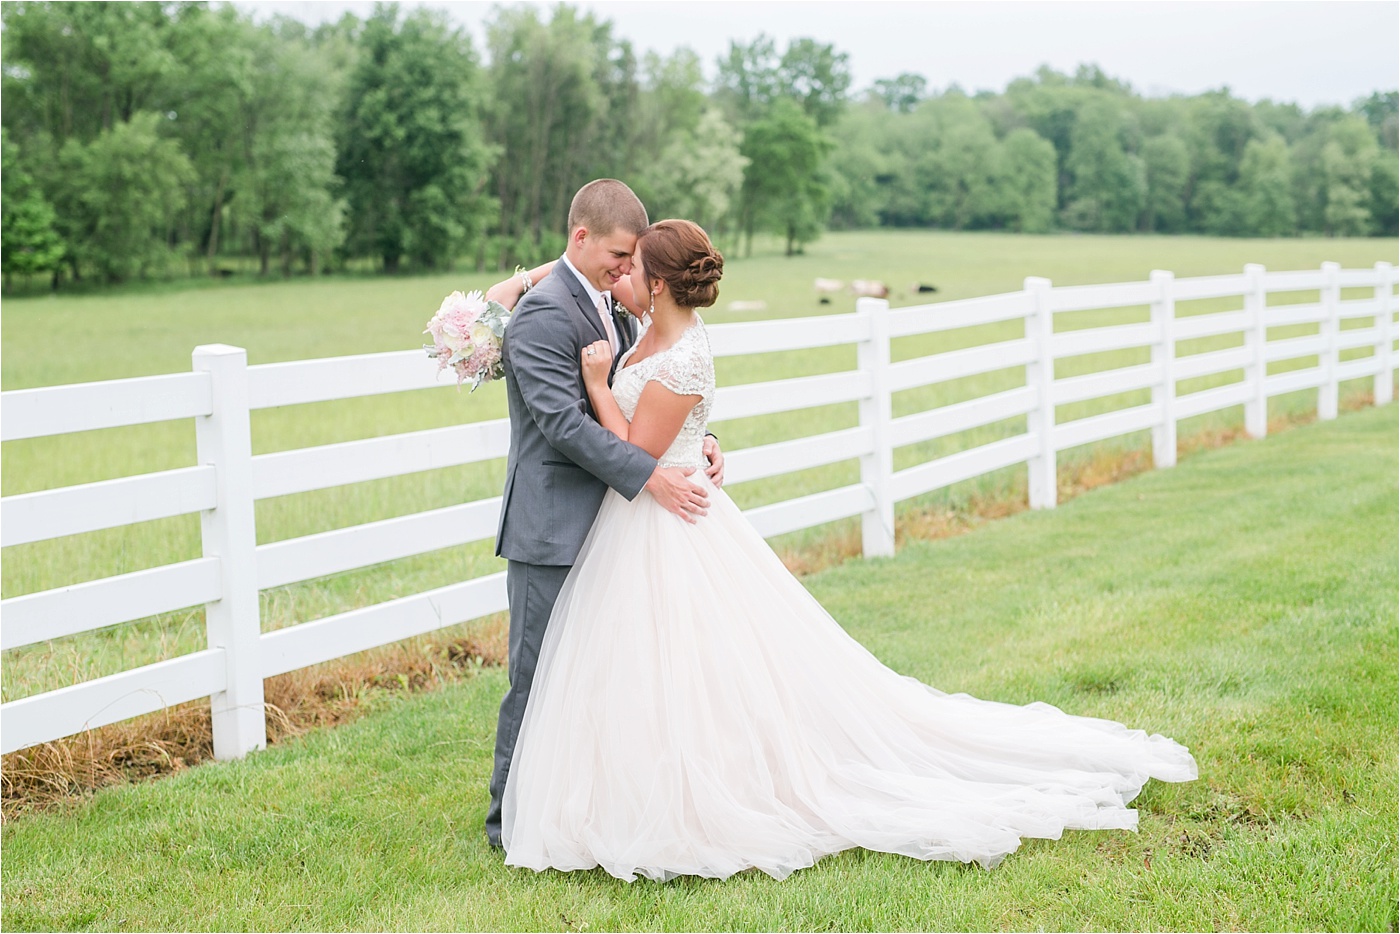 A Blush Outdoor wedding at Irongate Equestrian | KariMe Photography_0131